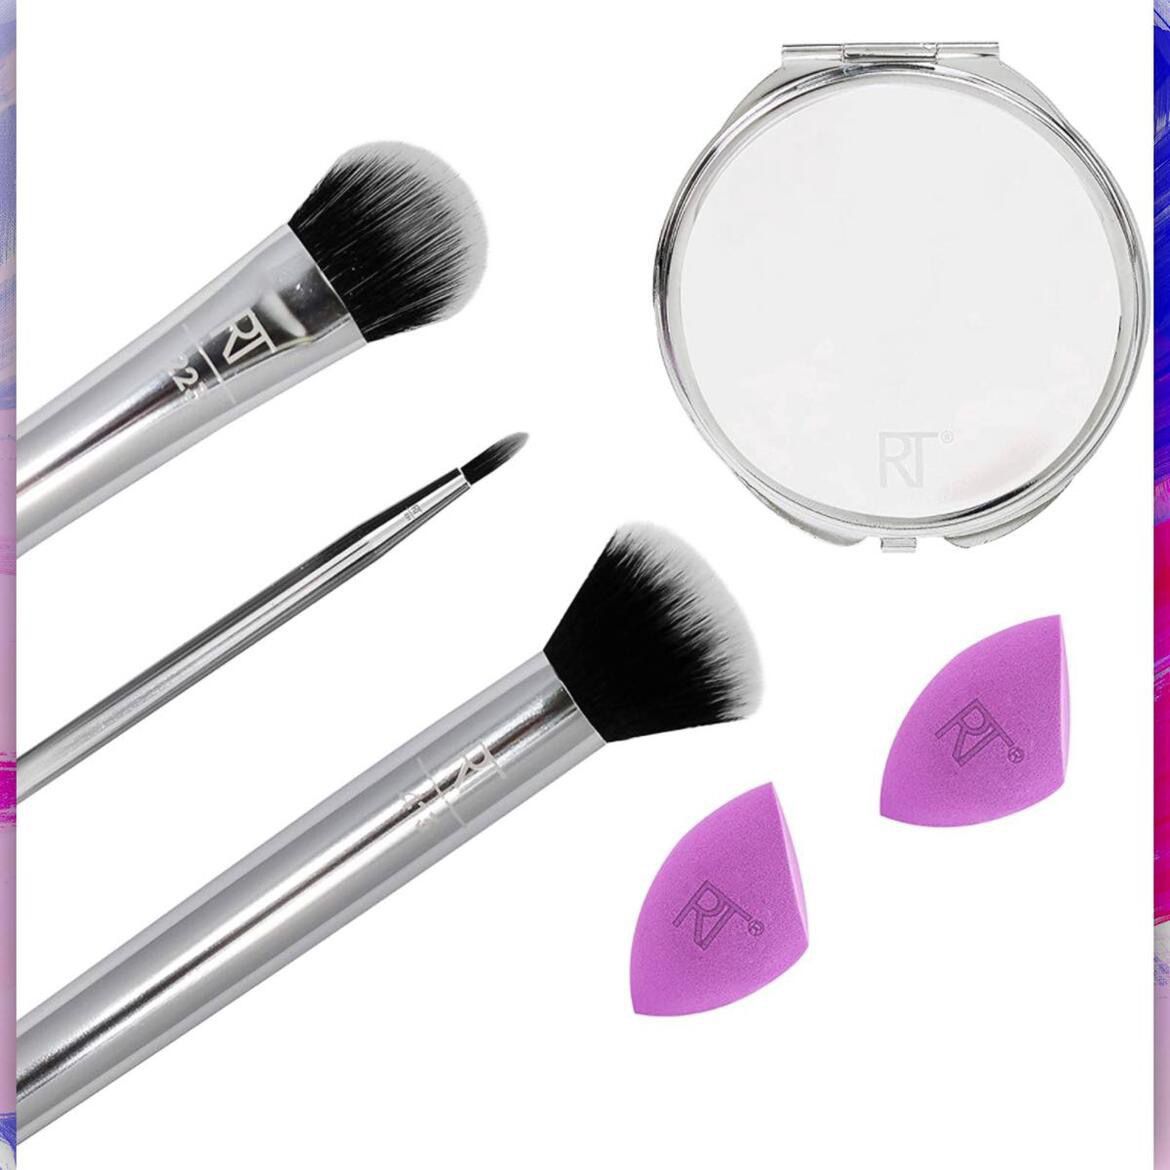 Real Techniques Poppin' Perfection Makeup Brush Set with Makeup Blender Beauty Sponges and Compact Makeup Mirror, Set of 6